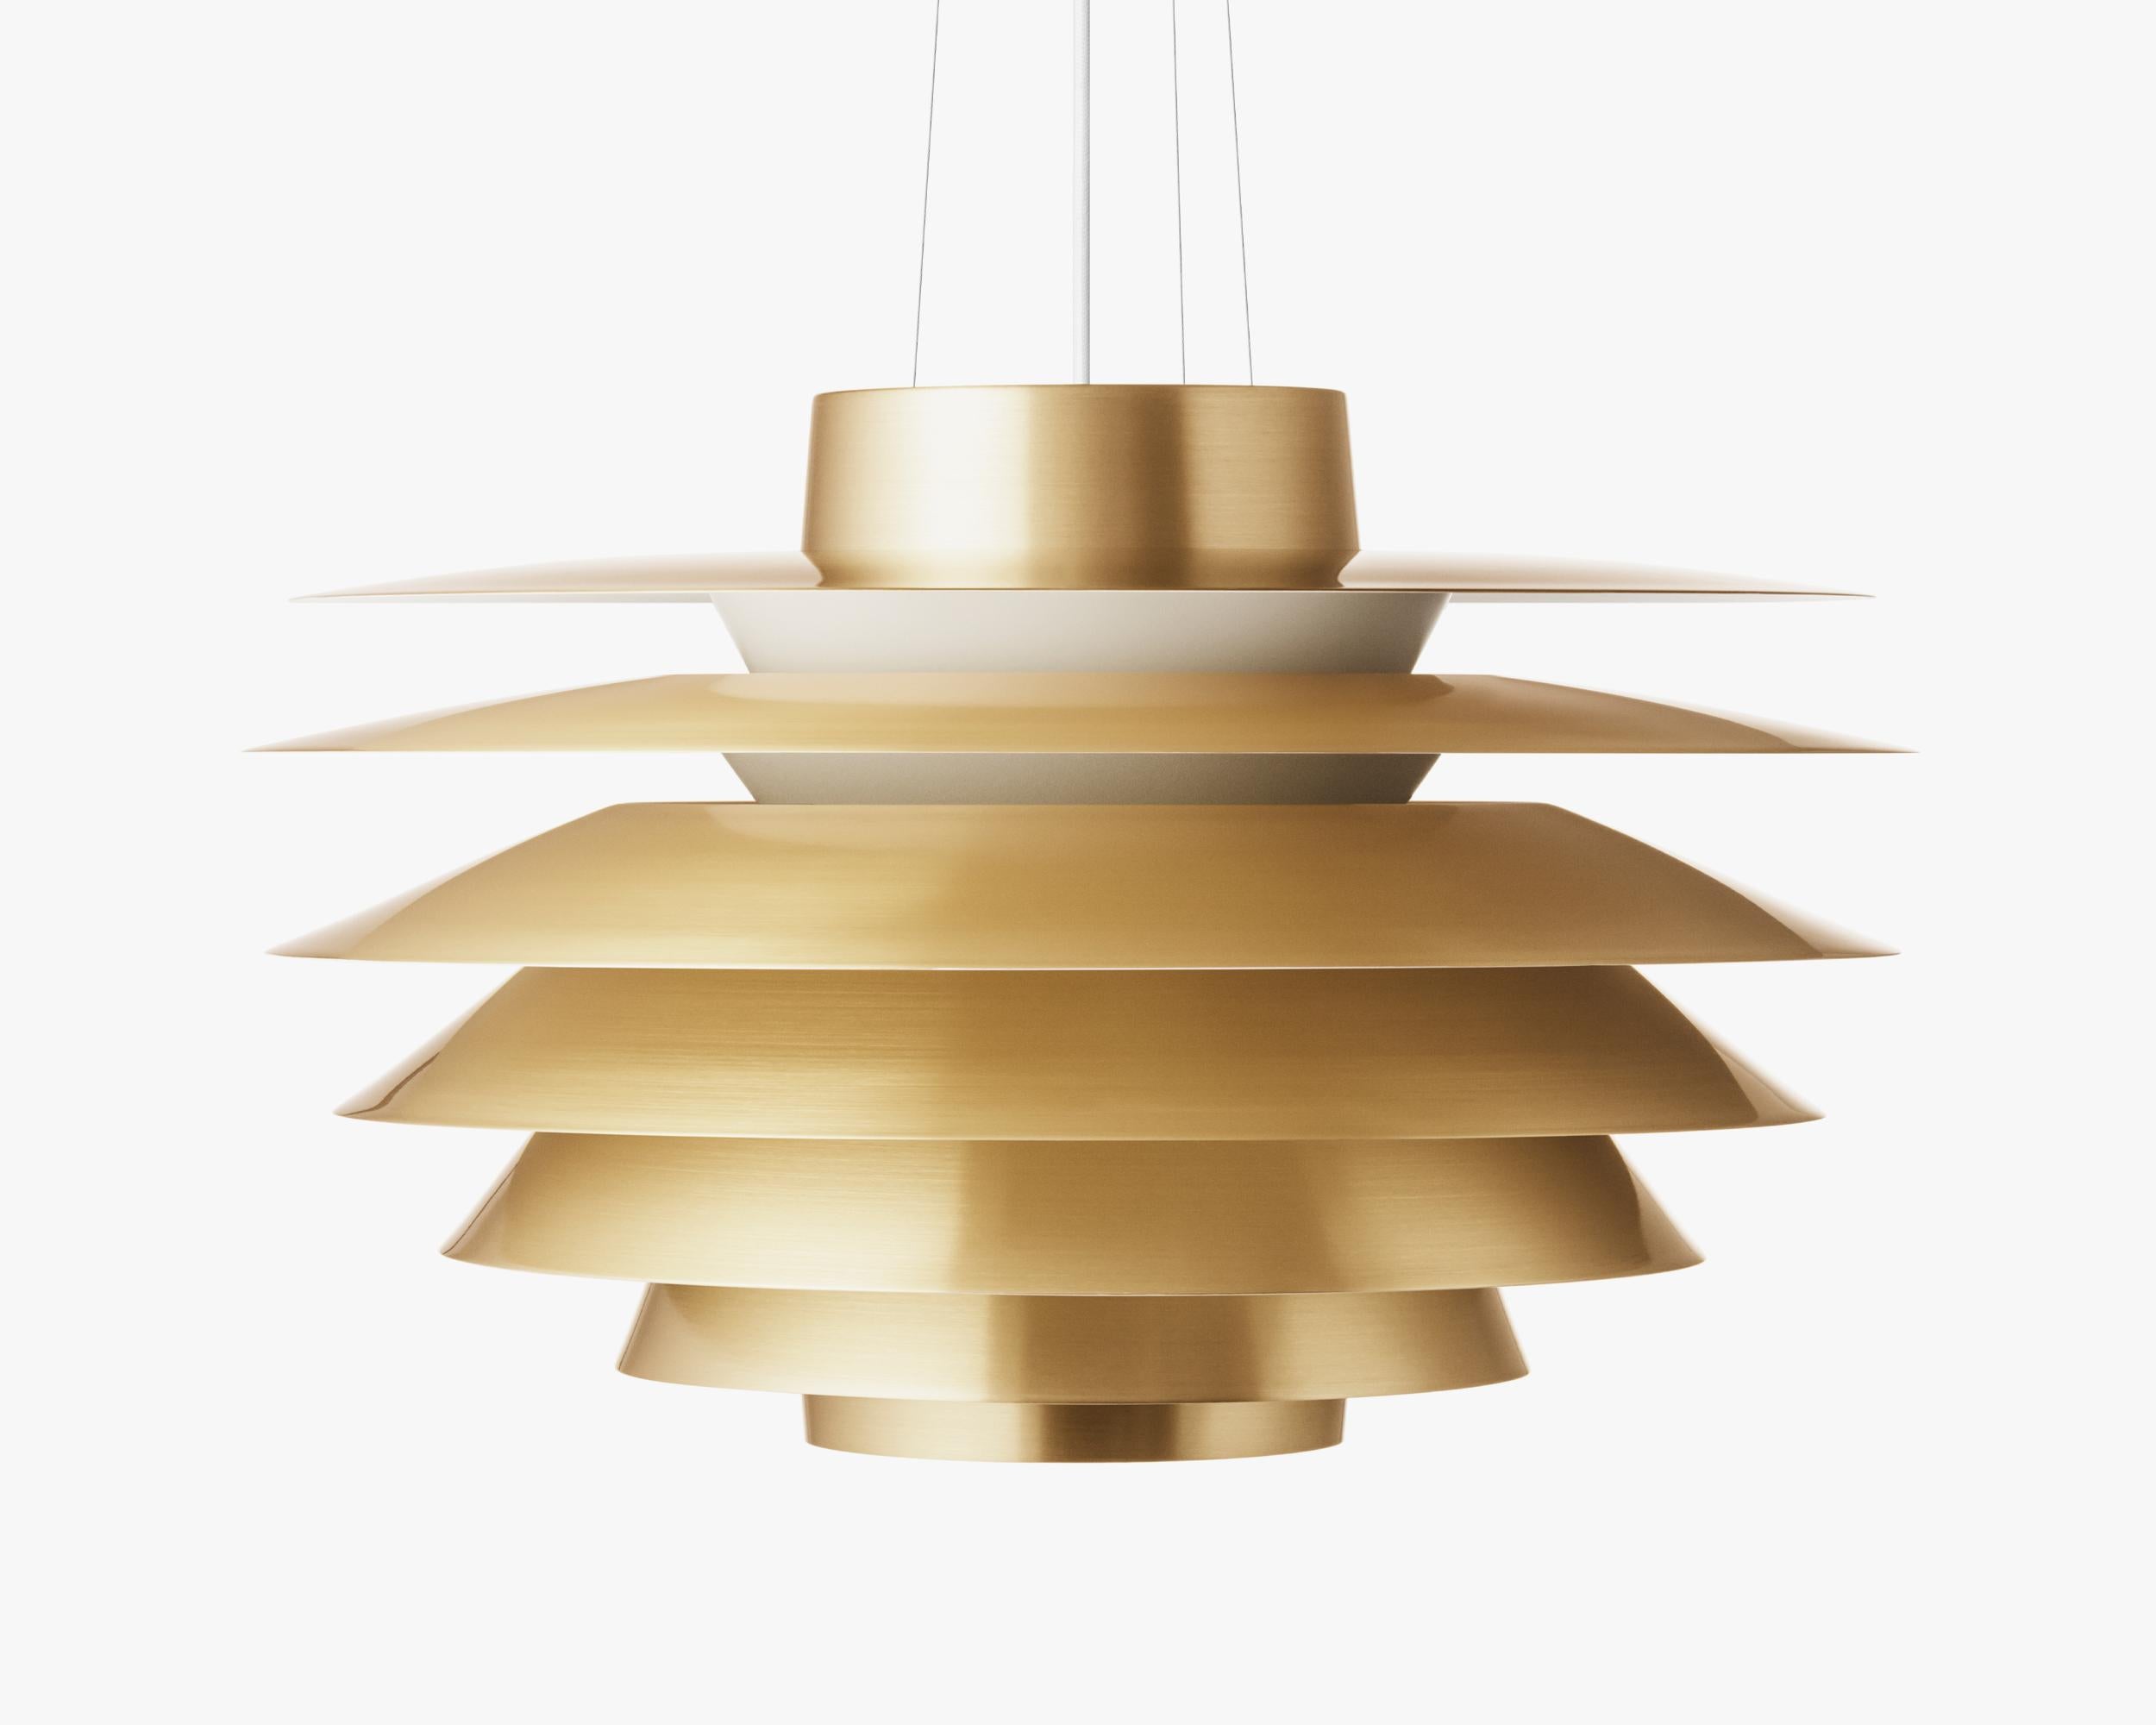 Pendant Lamp Verona signed by Sven Middelboe for LYFA.
Official new edition

Textile wire (white) 300cm
Bulb: G9/E14/27 max 40/60W (110V-230V)

Solid brass

Sizes available:
D 400 mm – H 276 mm
D 720 mm – H 459 mm

VERONA is a